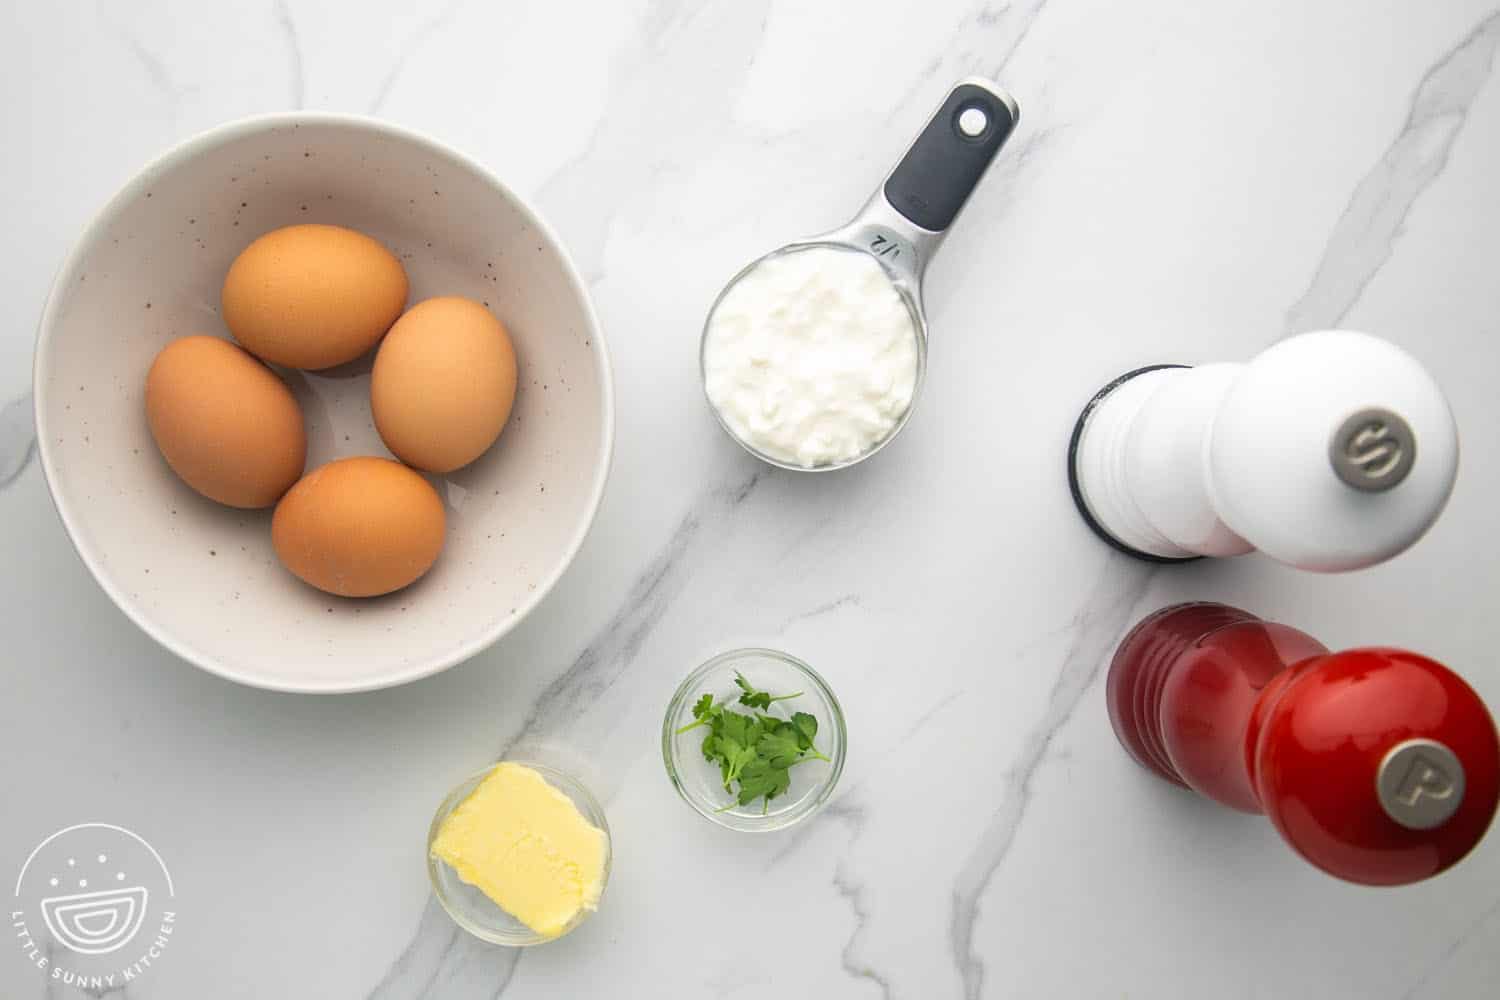 a bowl holding four brown eggs next to a half cup of cottage cheese, salt and pepper shakers, a pat of butter, and fresh parsley.